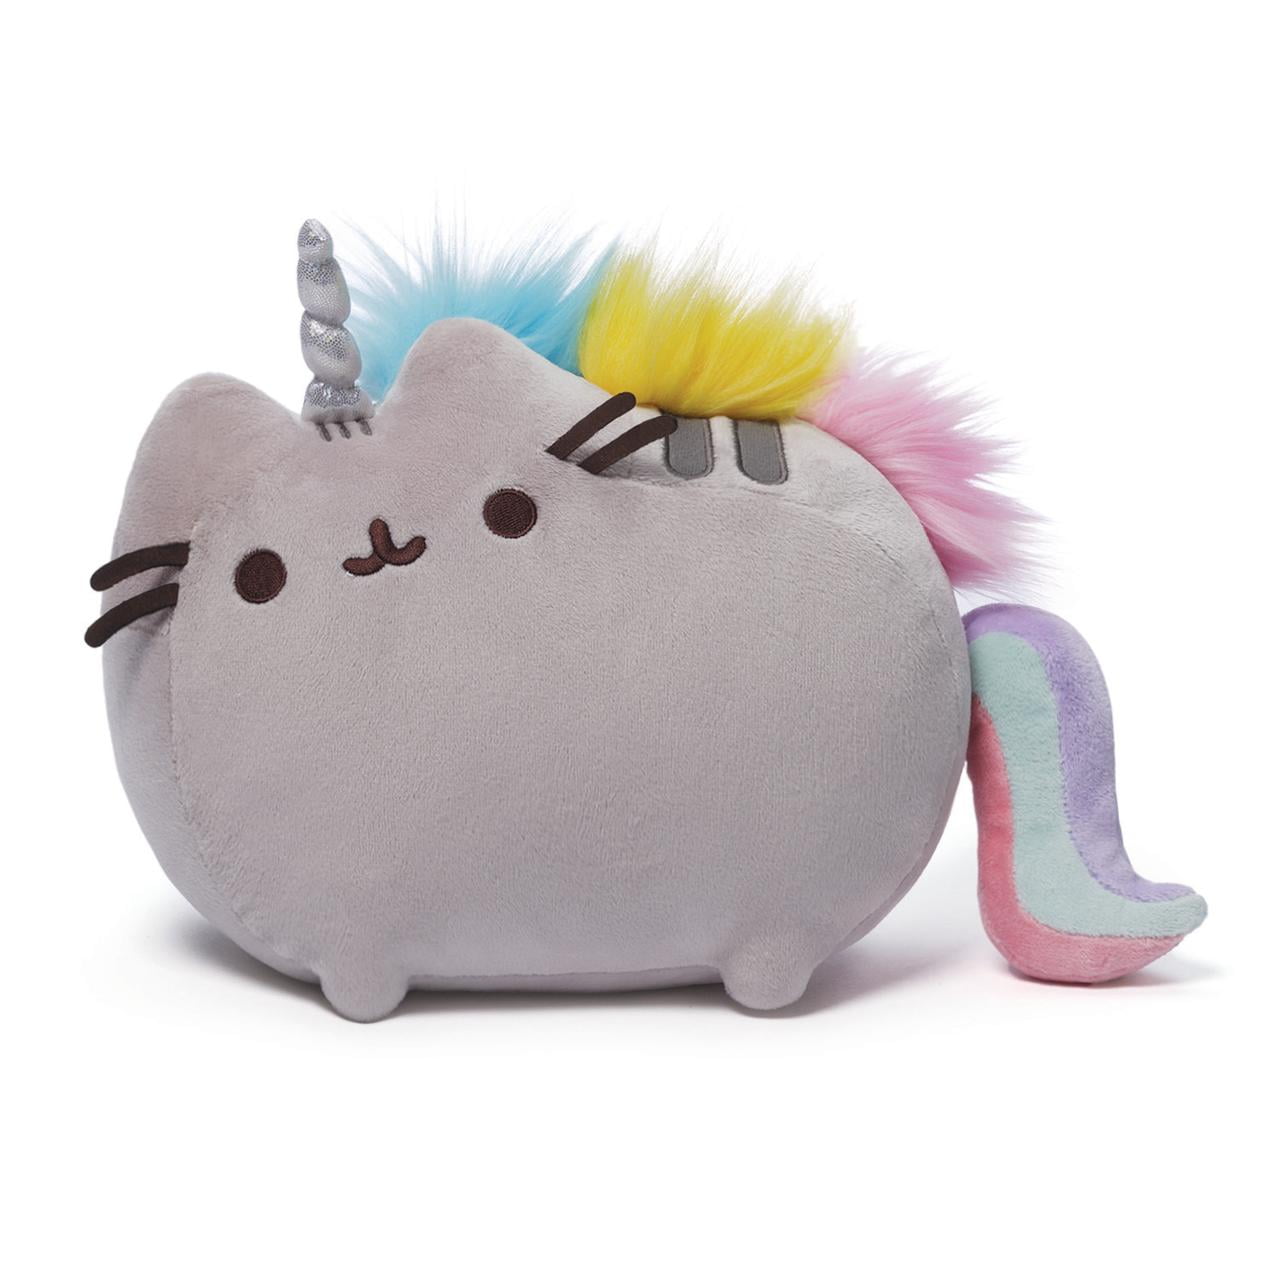 GUND Pusheen Plush Cat Holding Cotton Candy Cone for sale online 